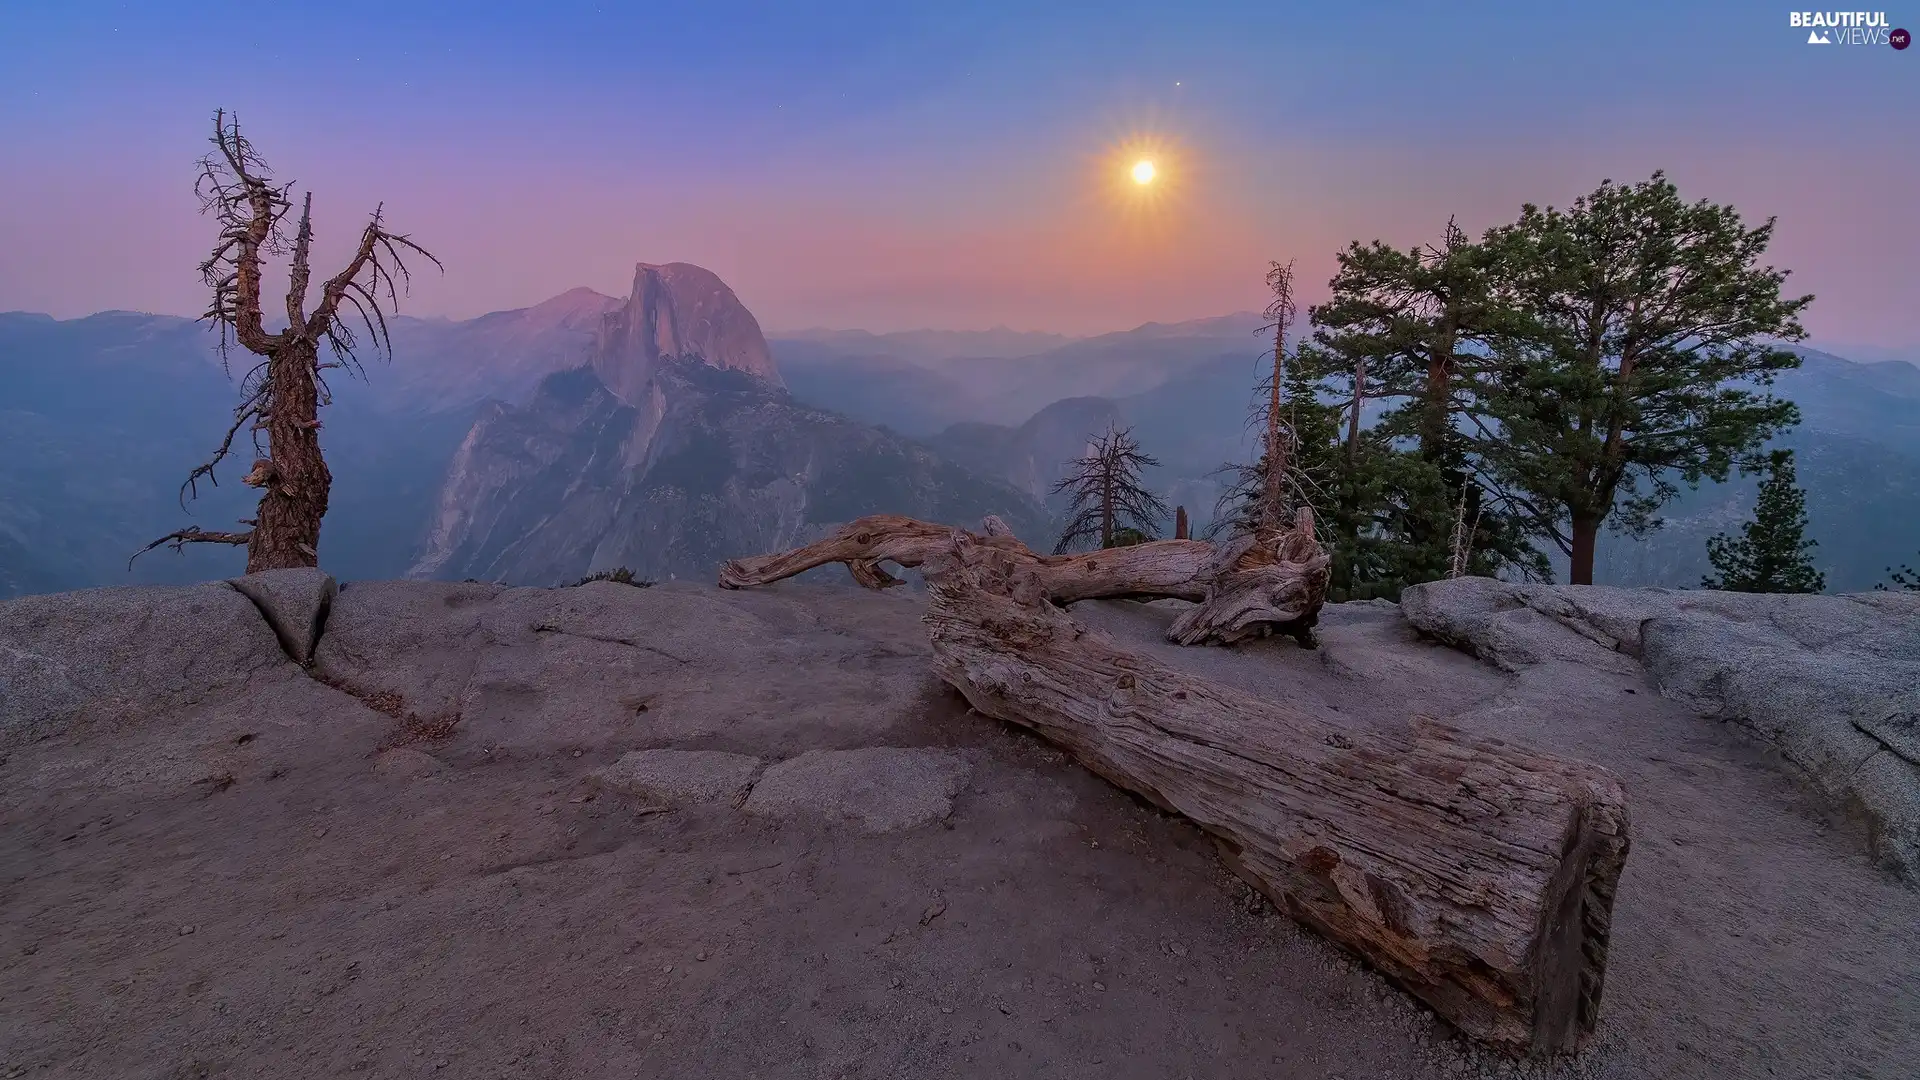 Fog, rocks, viewes, California, dry, Mountains, trees, The United States, Yosemite National Park, Lod on the beach